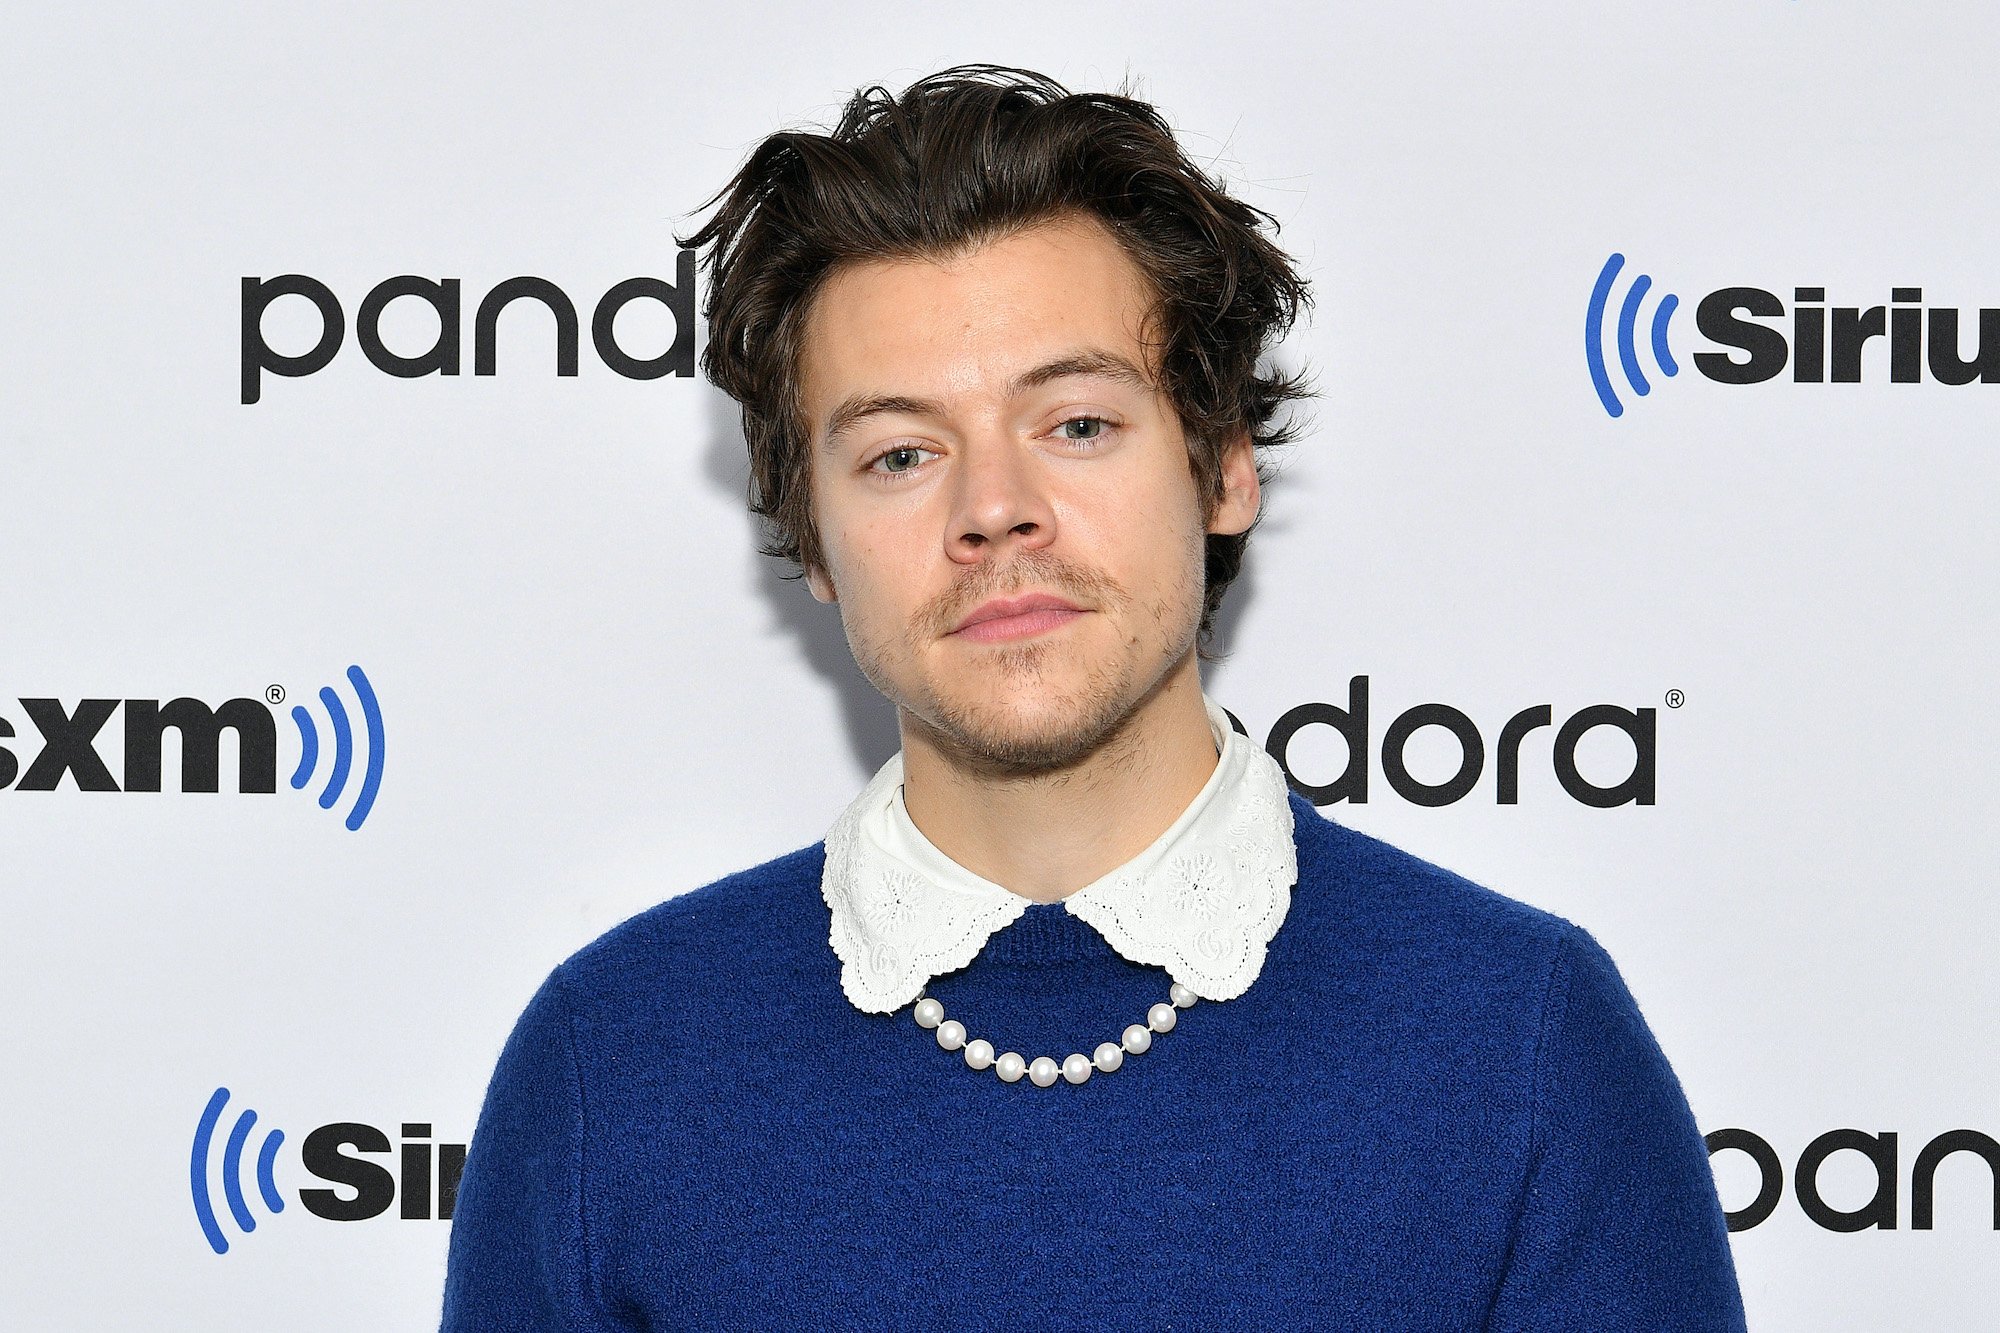 Harry Styles watermelon sugar singer in a blue sweater against a wall.